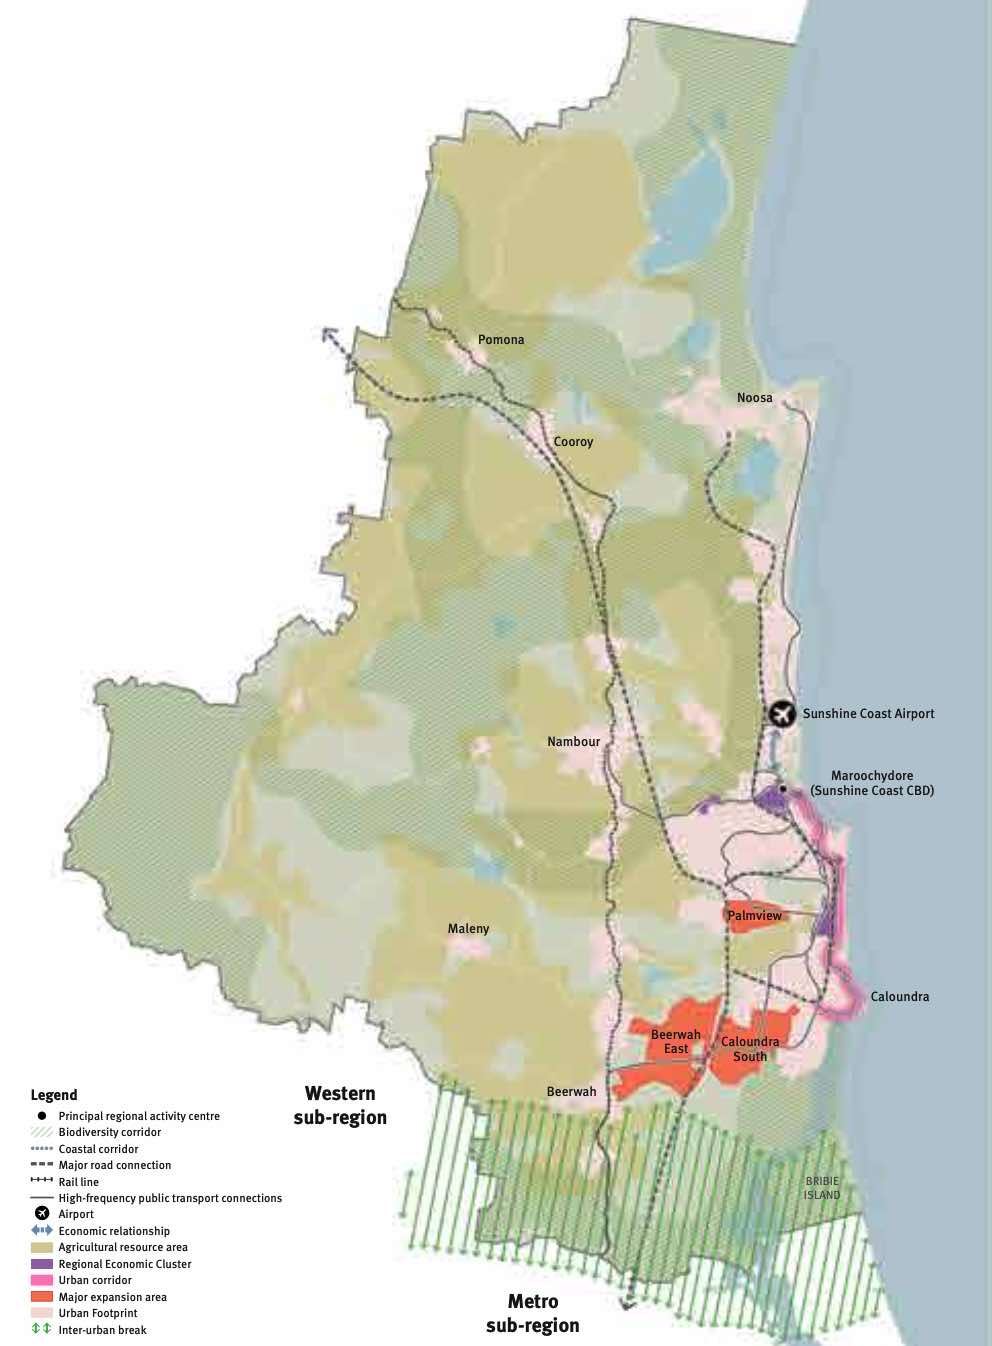 The Northern sub-region in South East Queensland’s regional plan¹